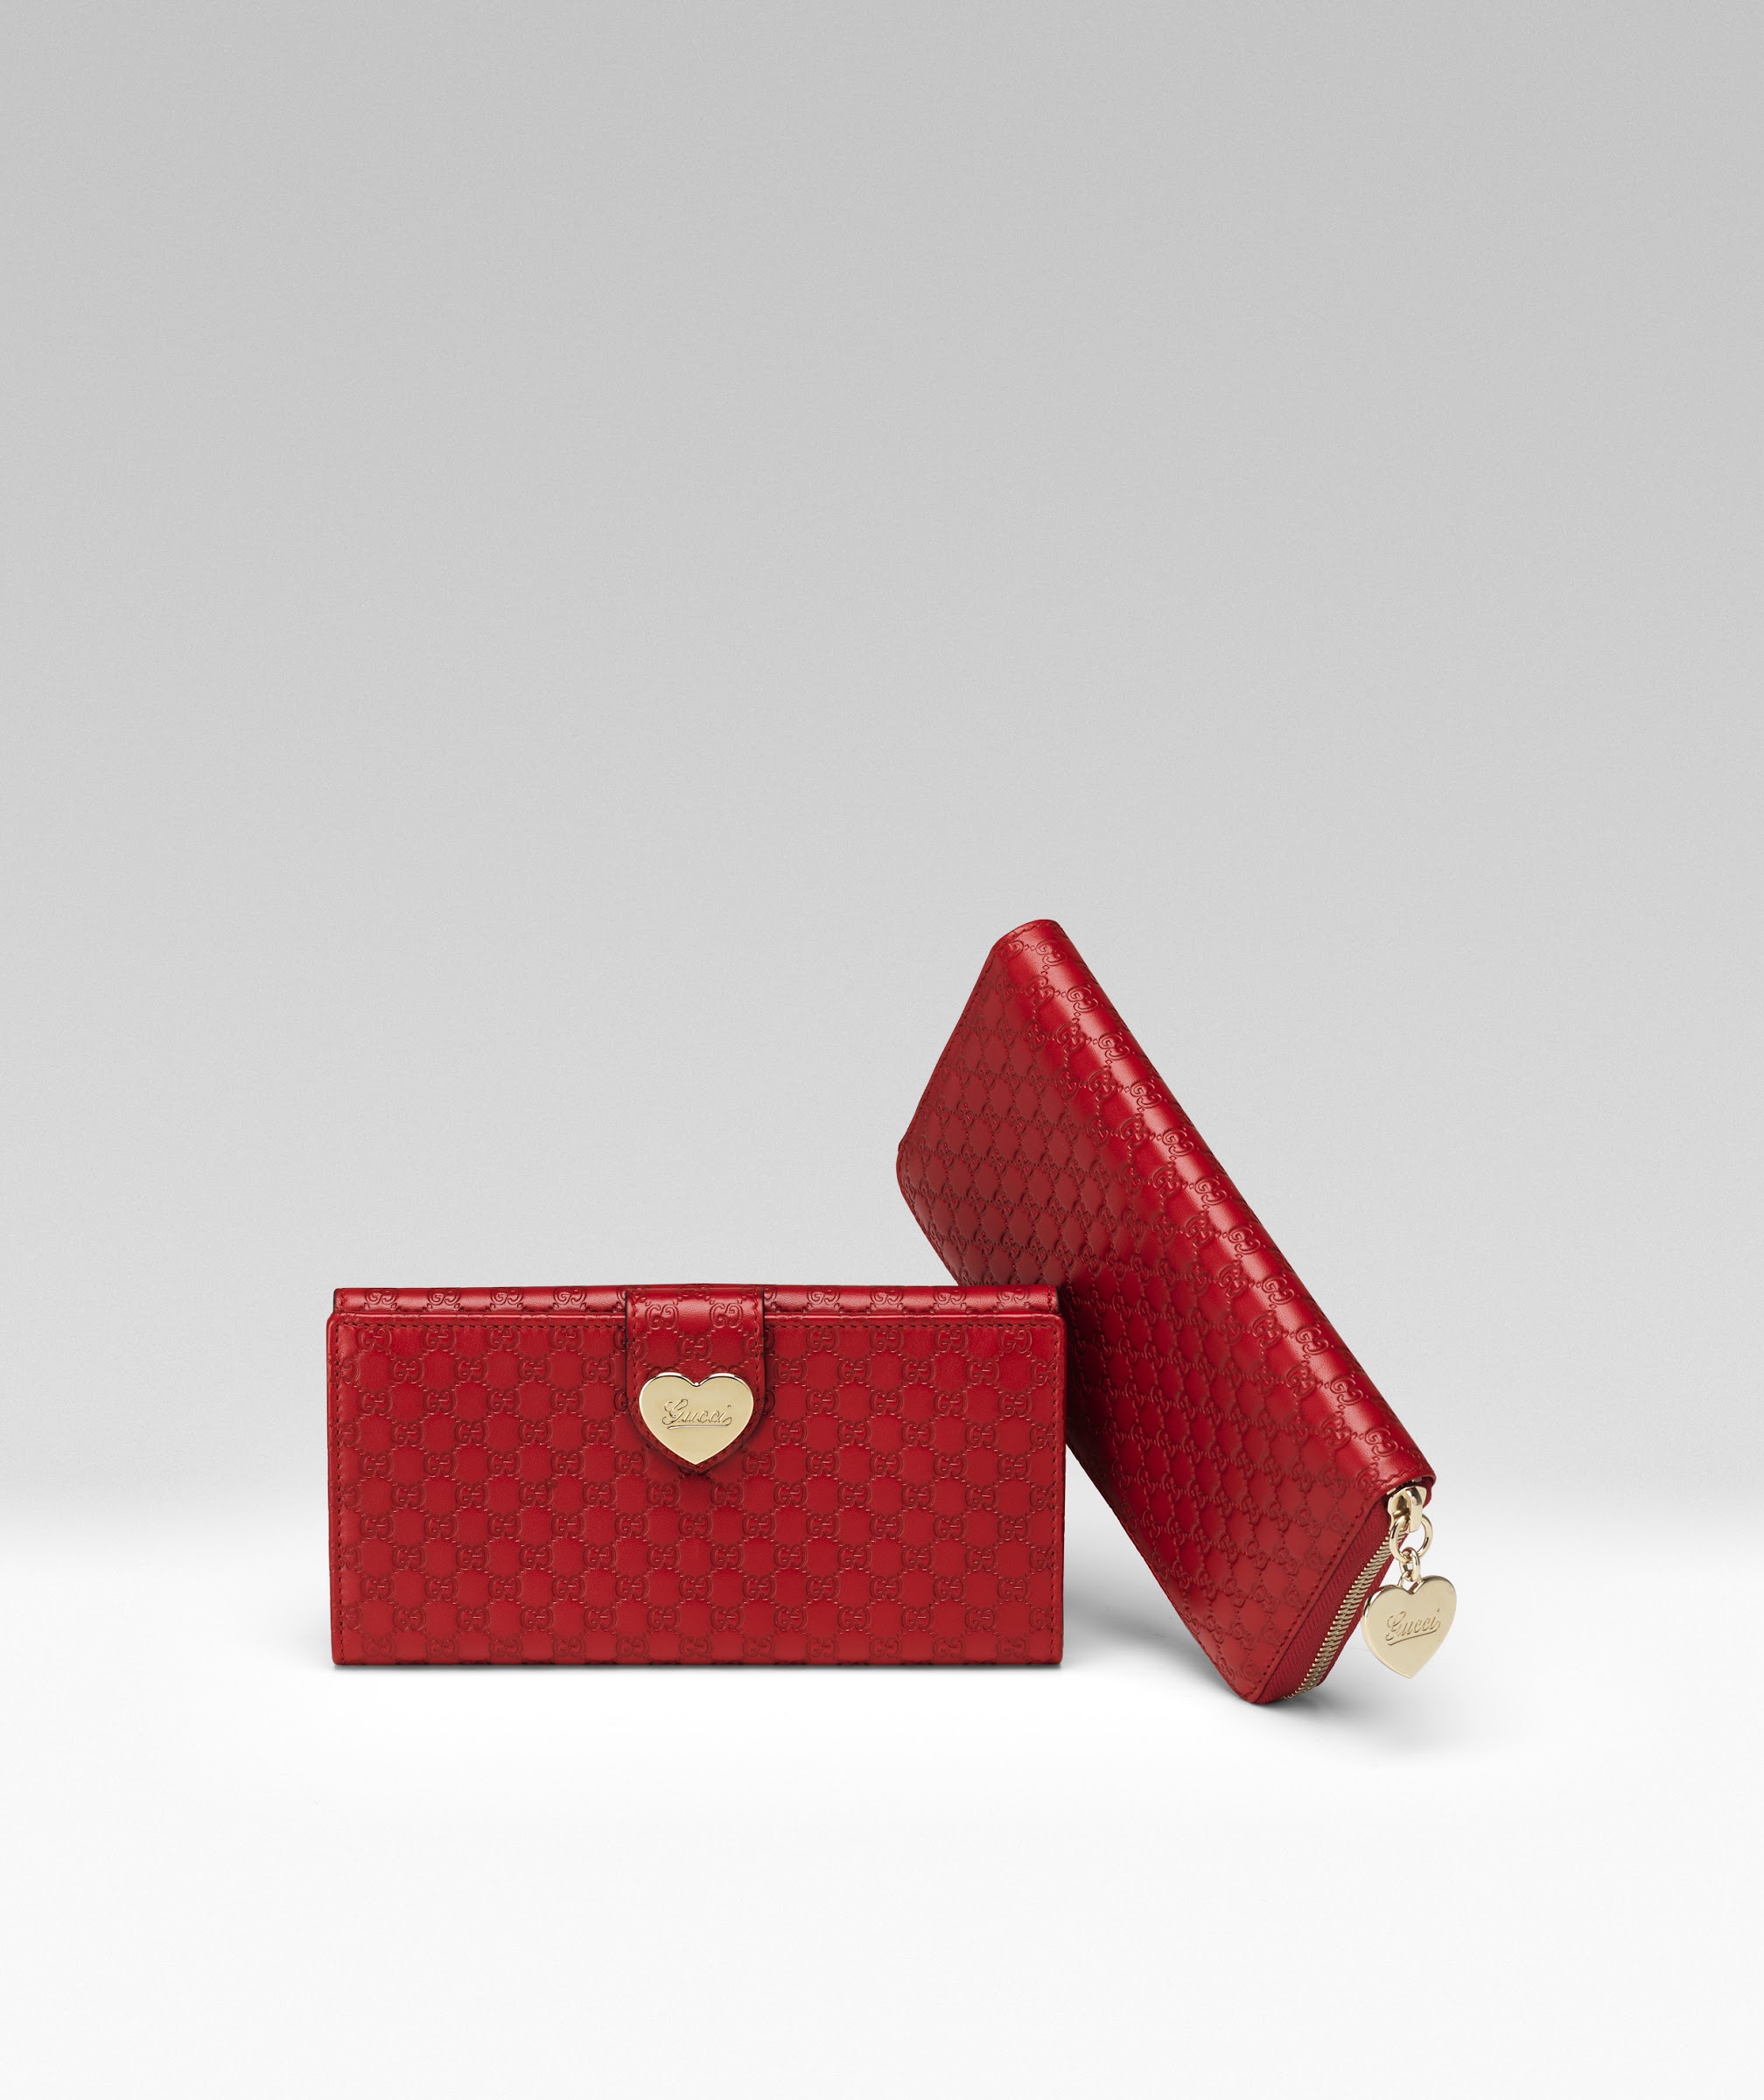 Valentine's Gift Guide: Gucci's Limited Edition Valentine's Day Collection